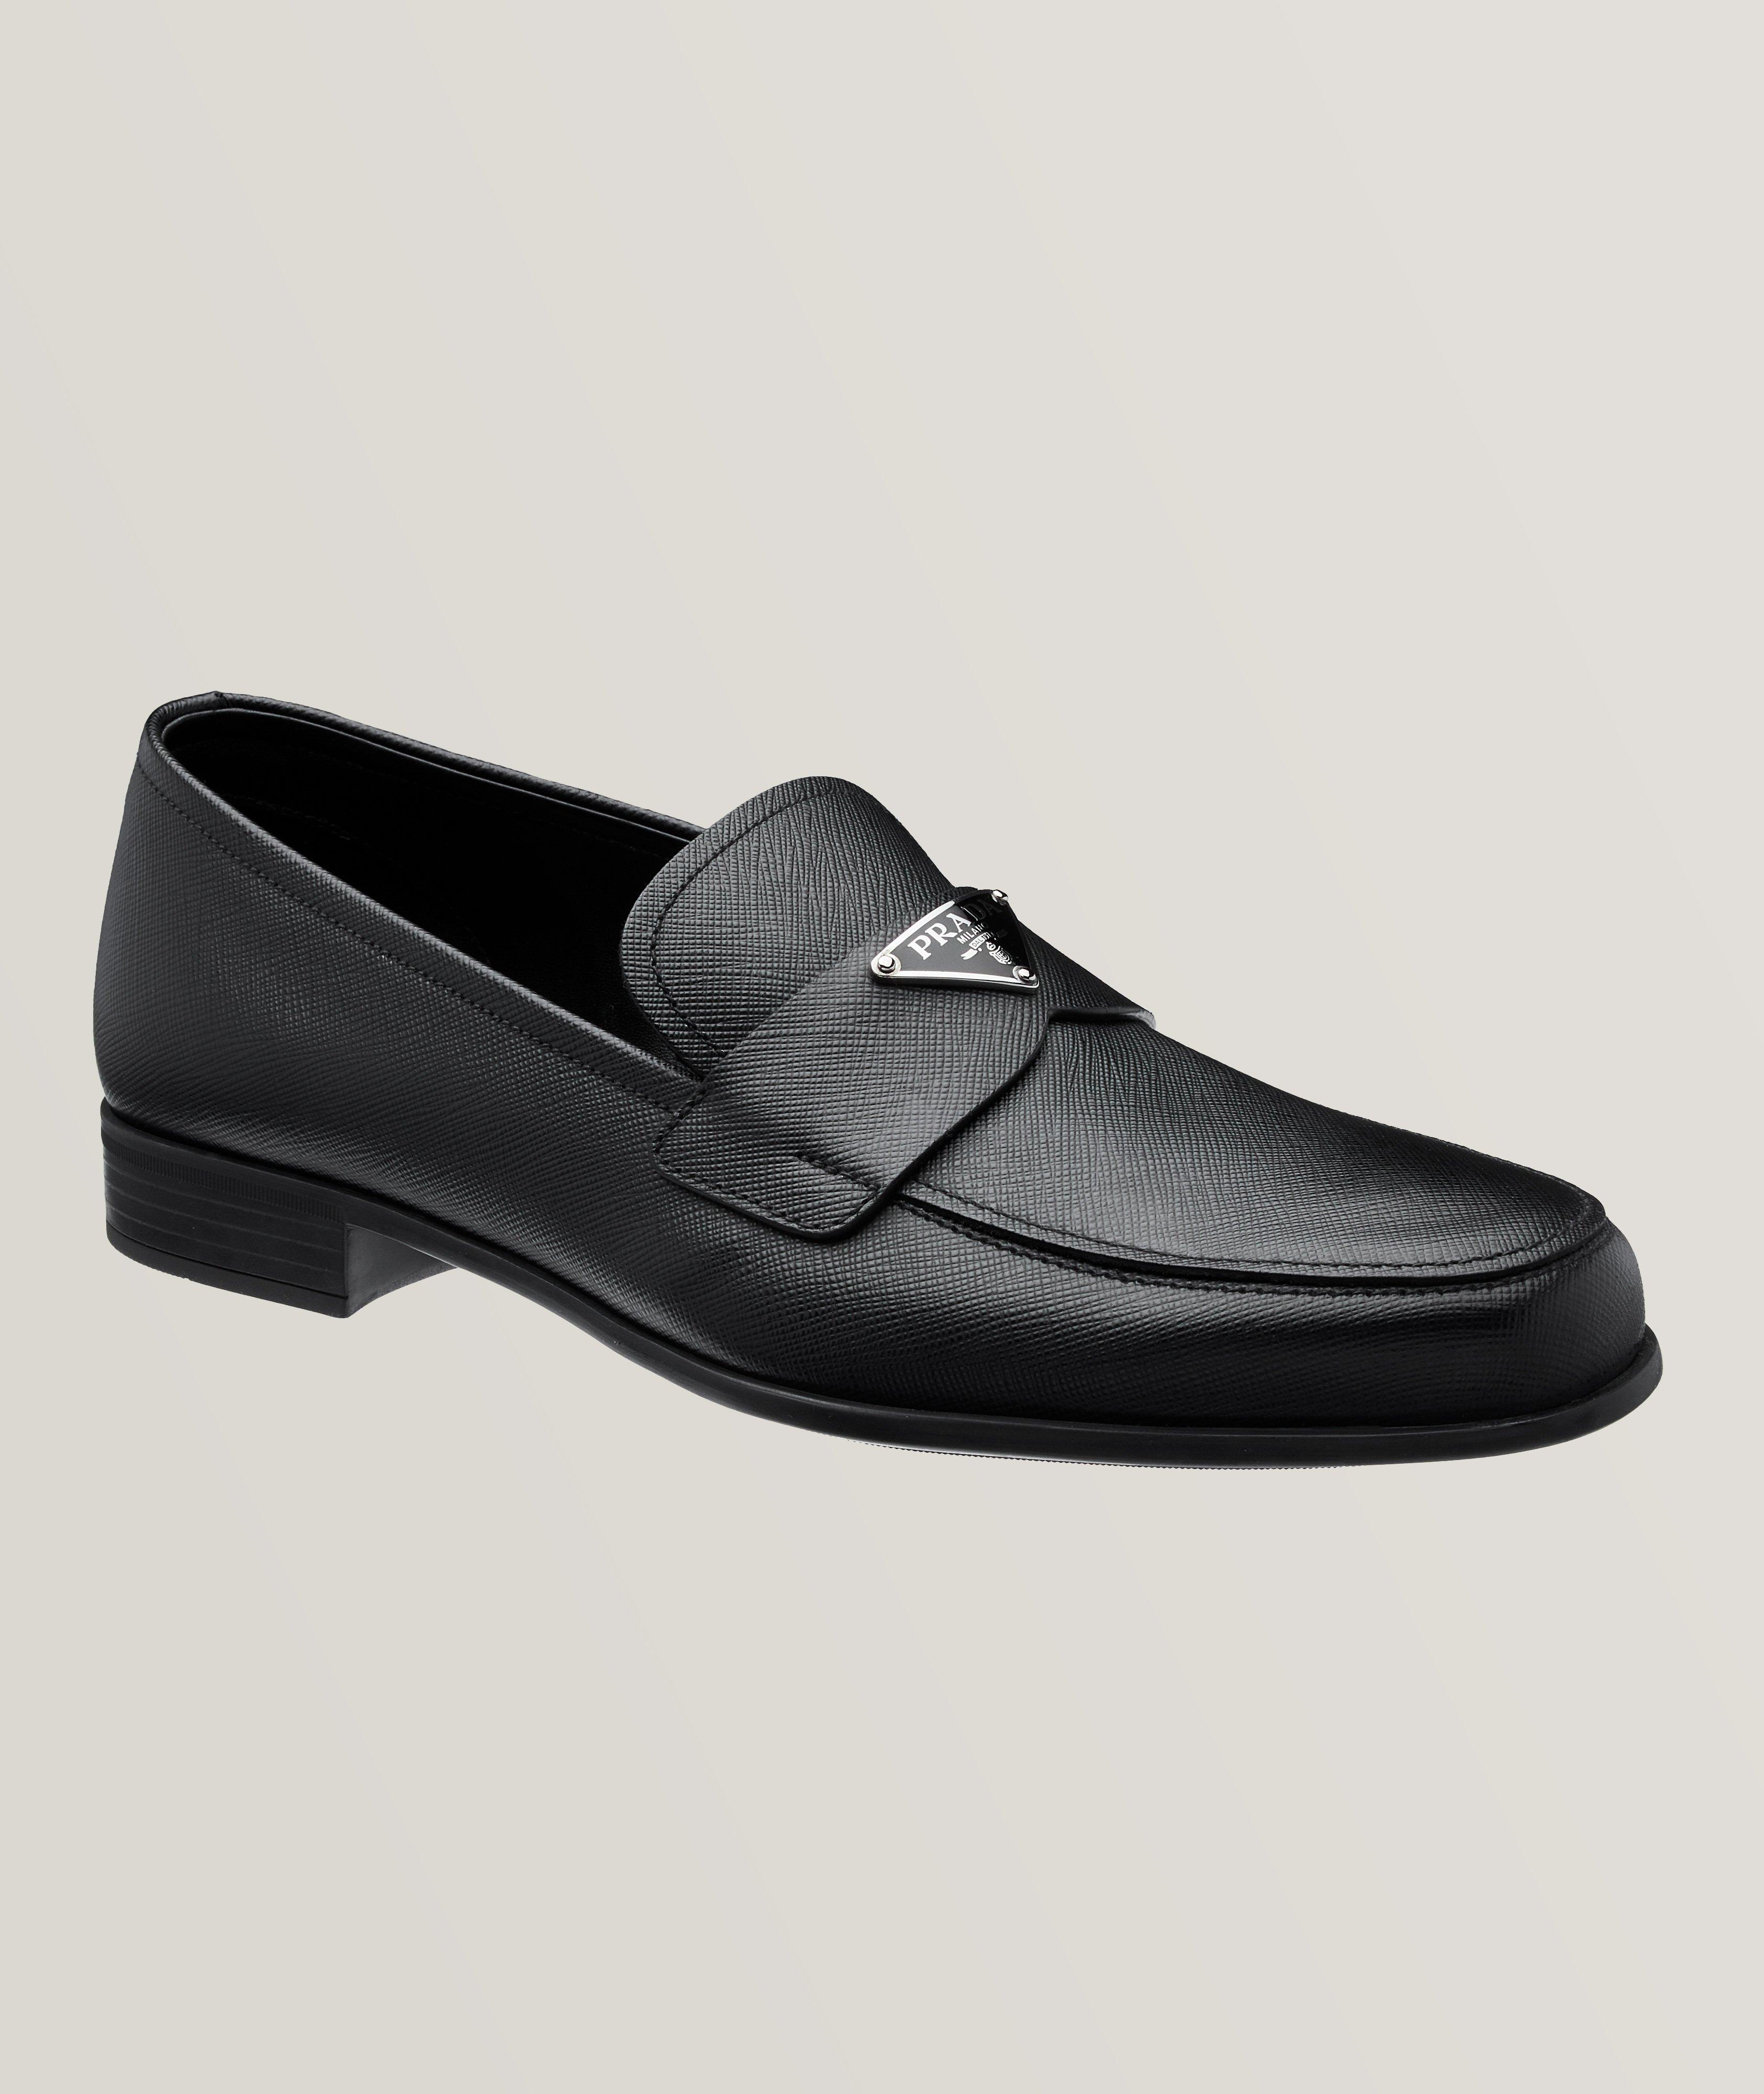 Plaque Logo Grained Leather Loafers image 0